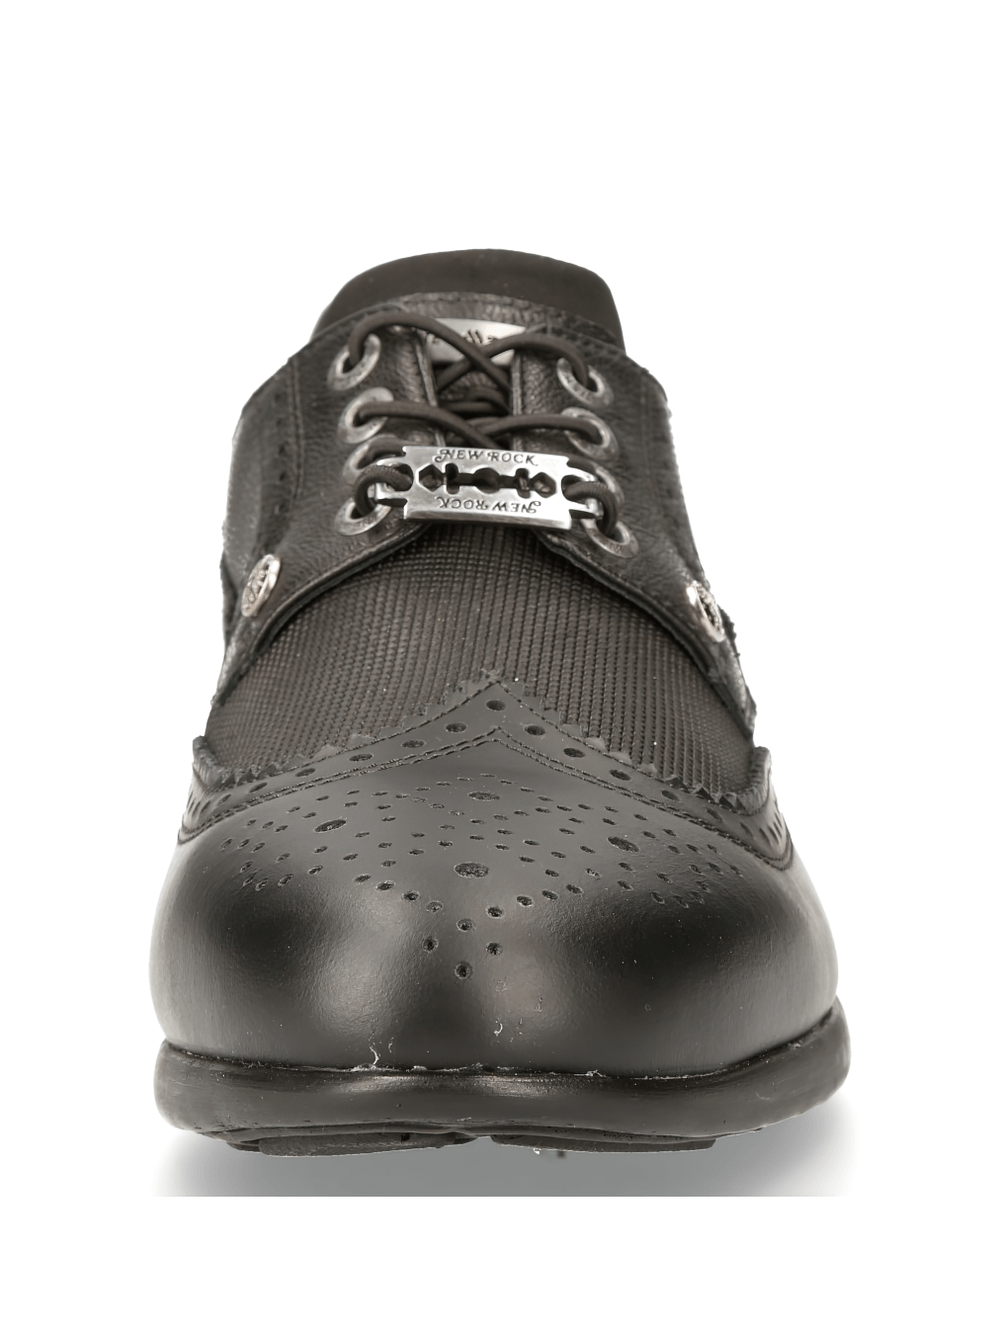 NEW ROCK Sleek Black Leather Lace-Up Athletic Shoes